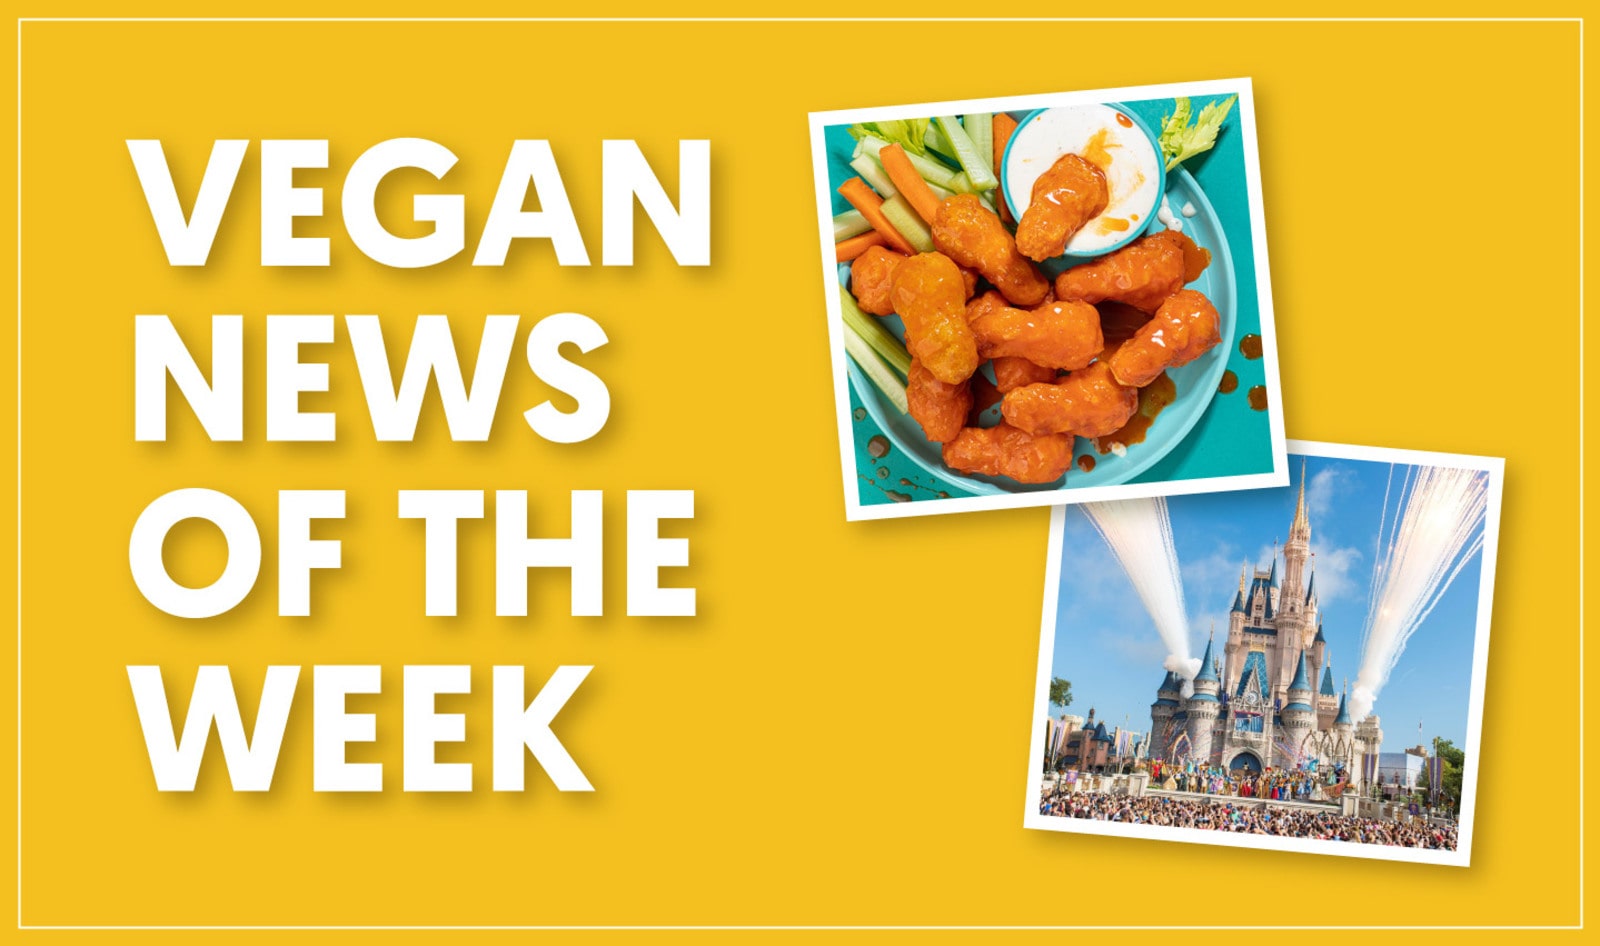 Meatless Super Bowl Wings, Disney’s Plant-Based Makeover, and More Vegan News of the Week